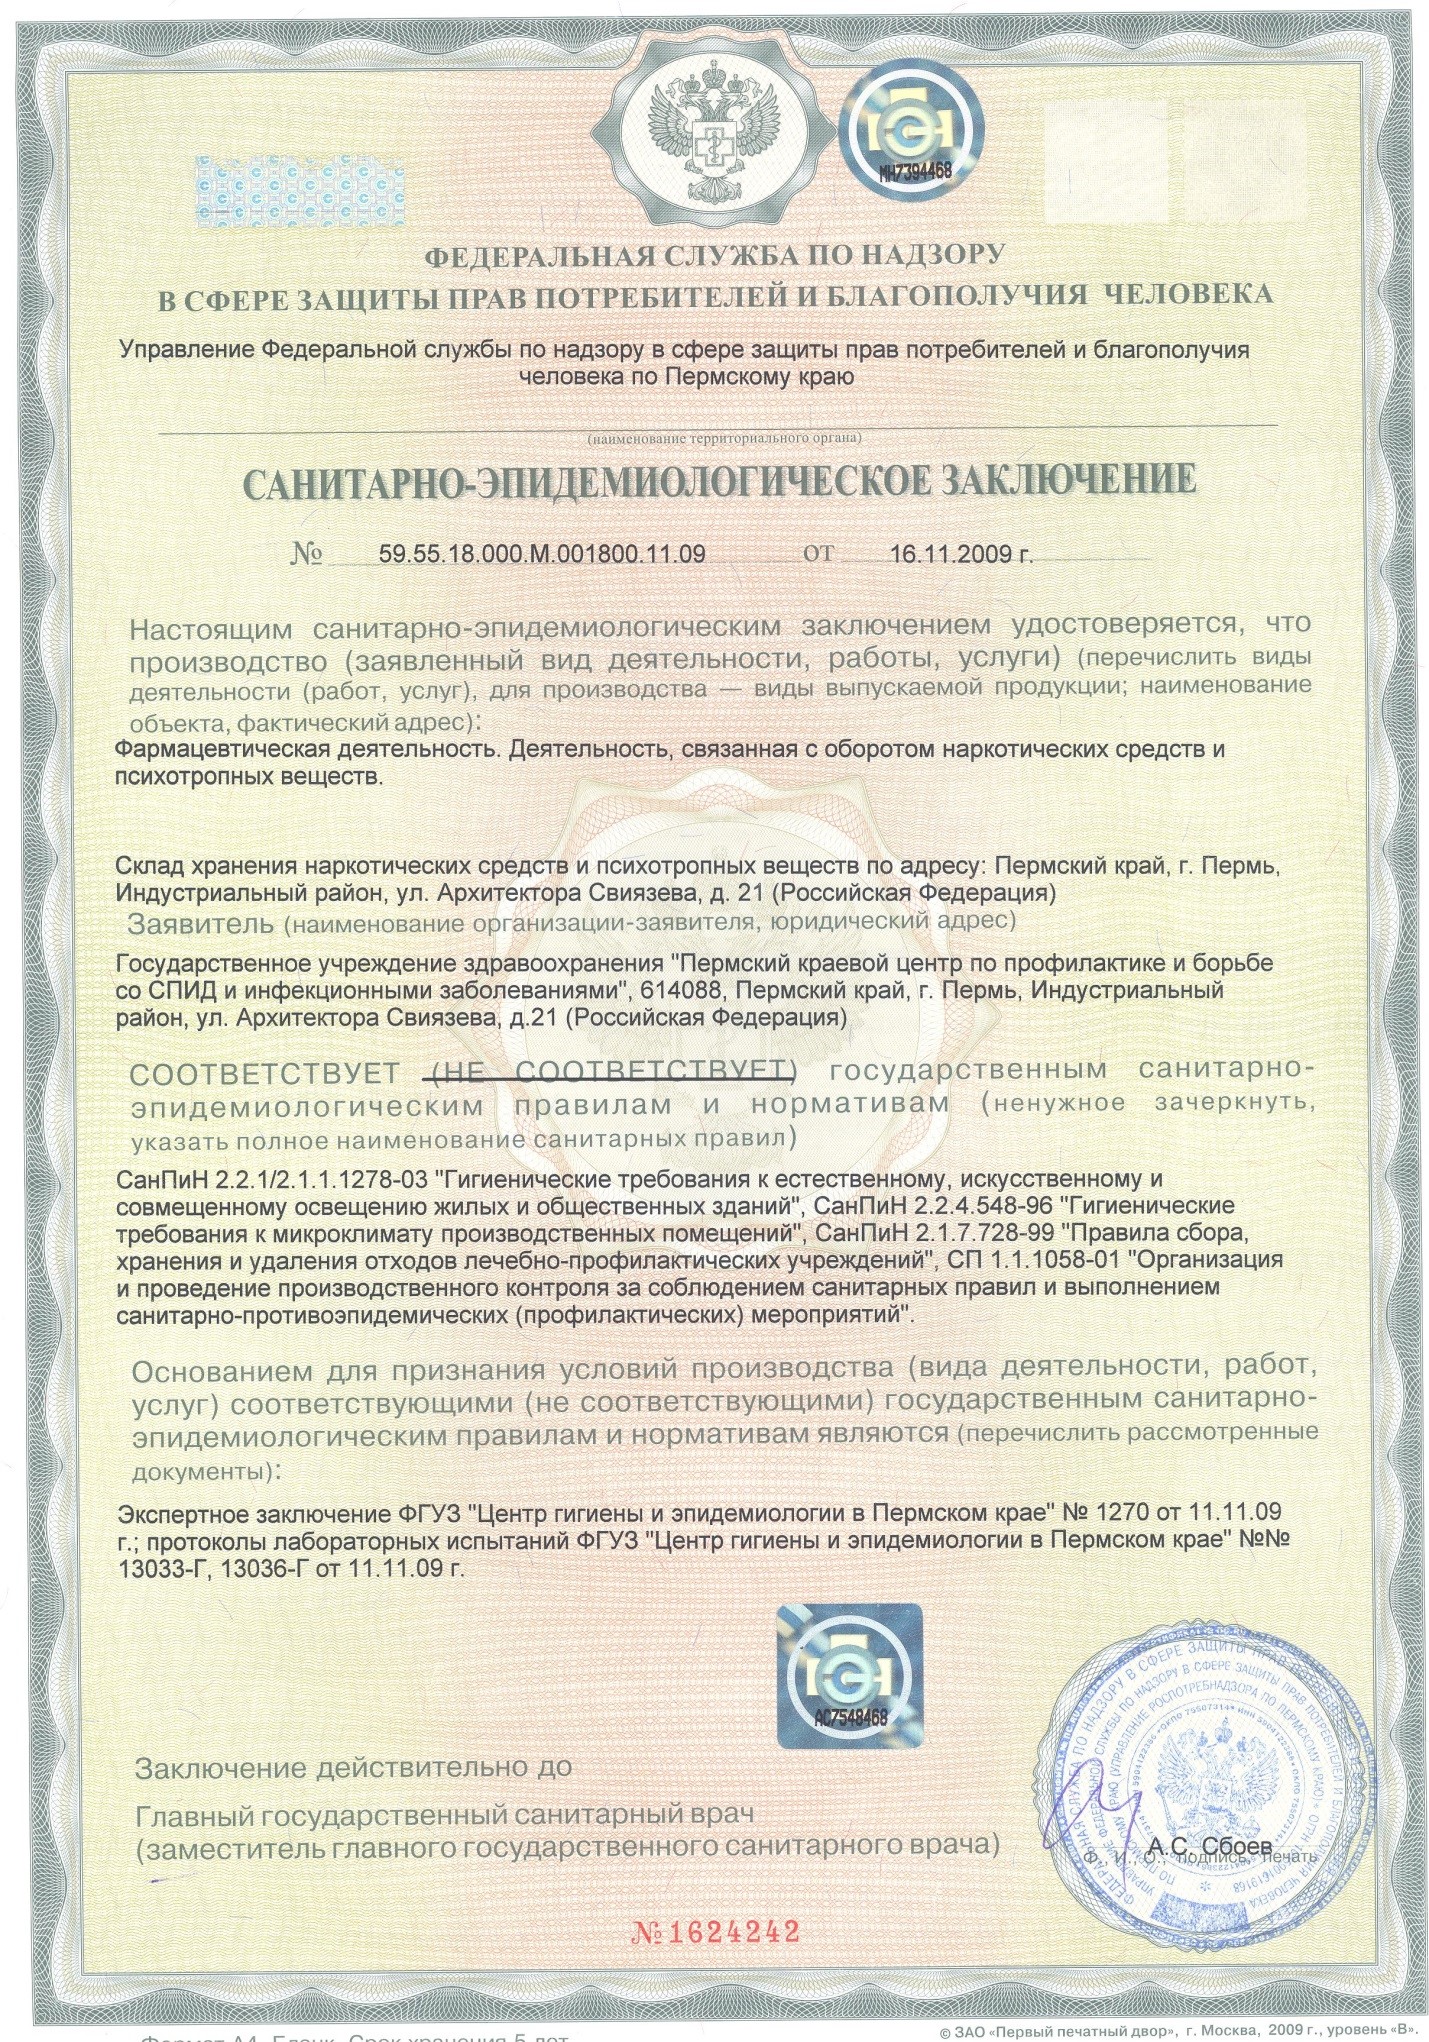 Sanitary-epidemiological certificate5